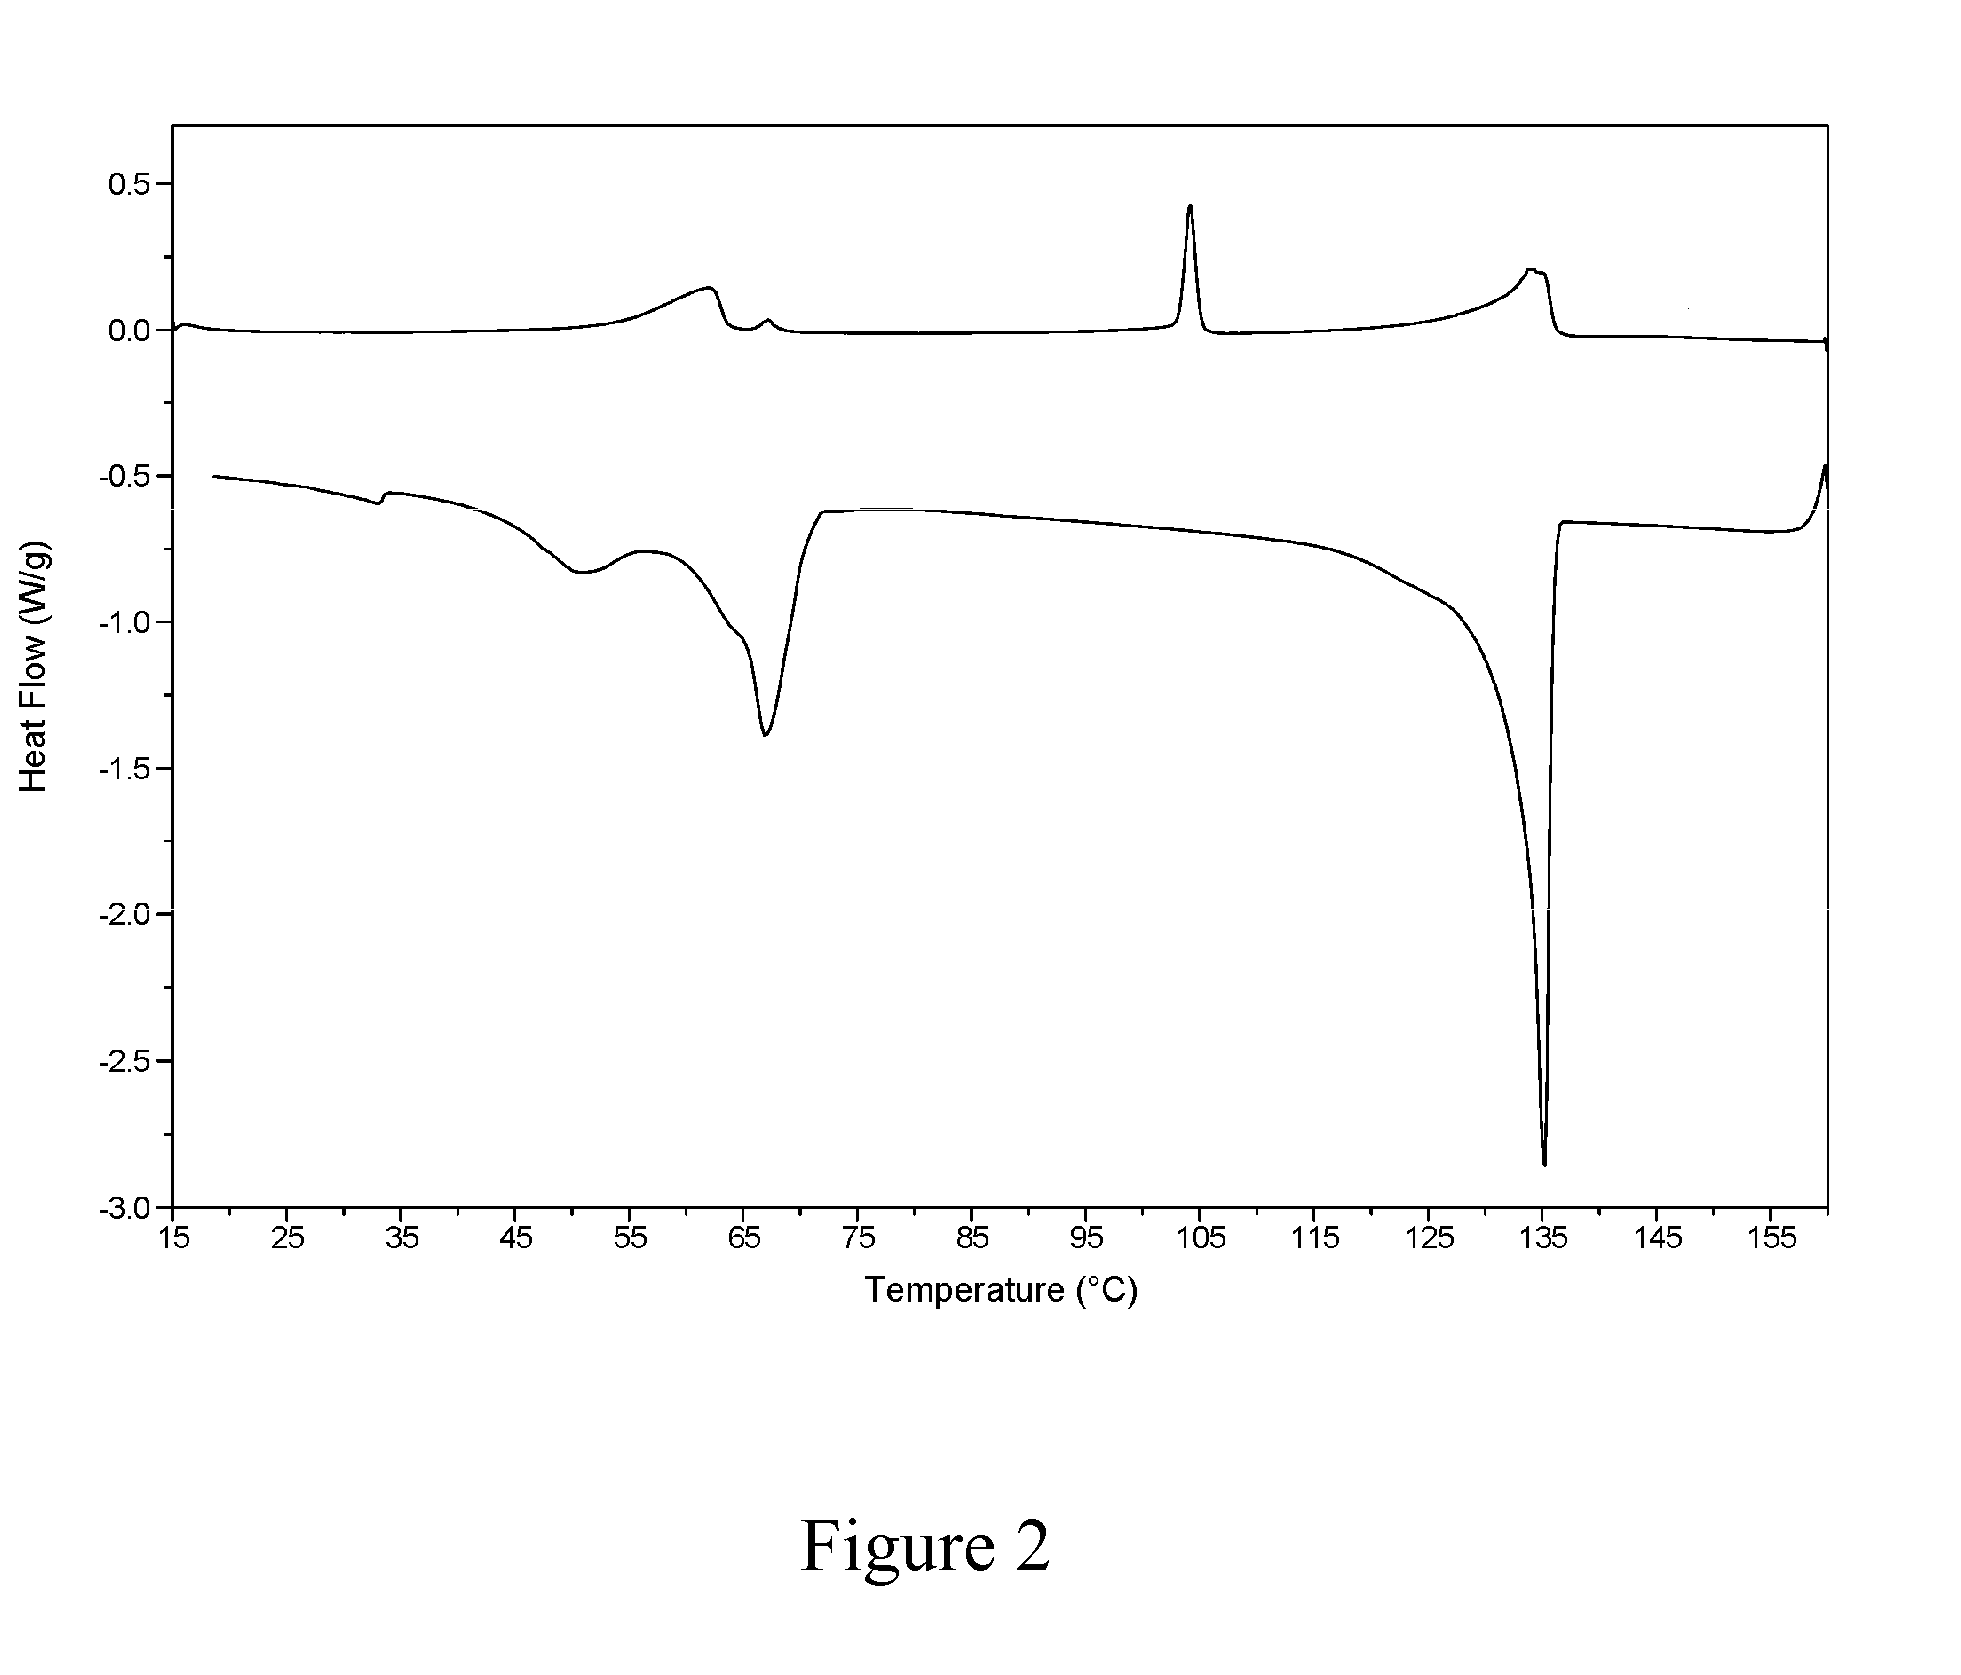 Particulate fabric softening composition and method of making it